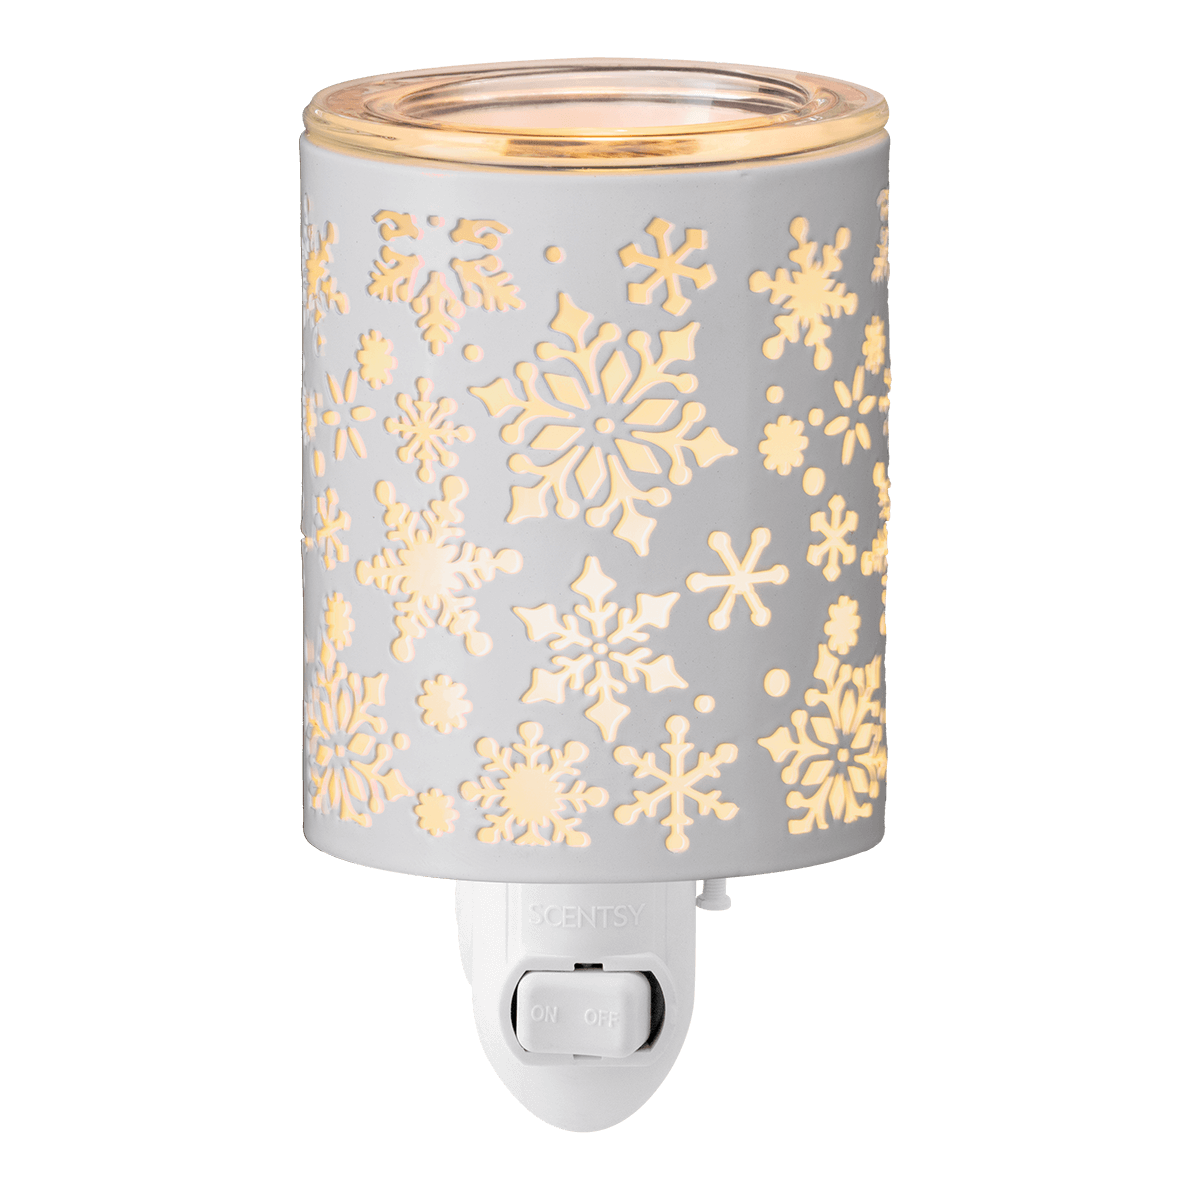 catching-snowflakes-scentsy-mini-warmer-the-safest-candles